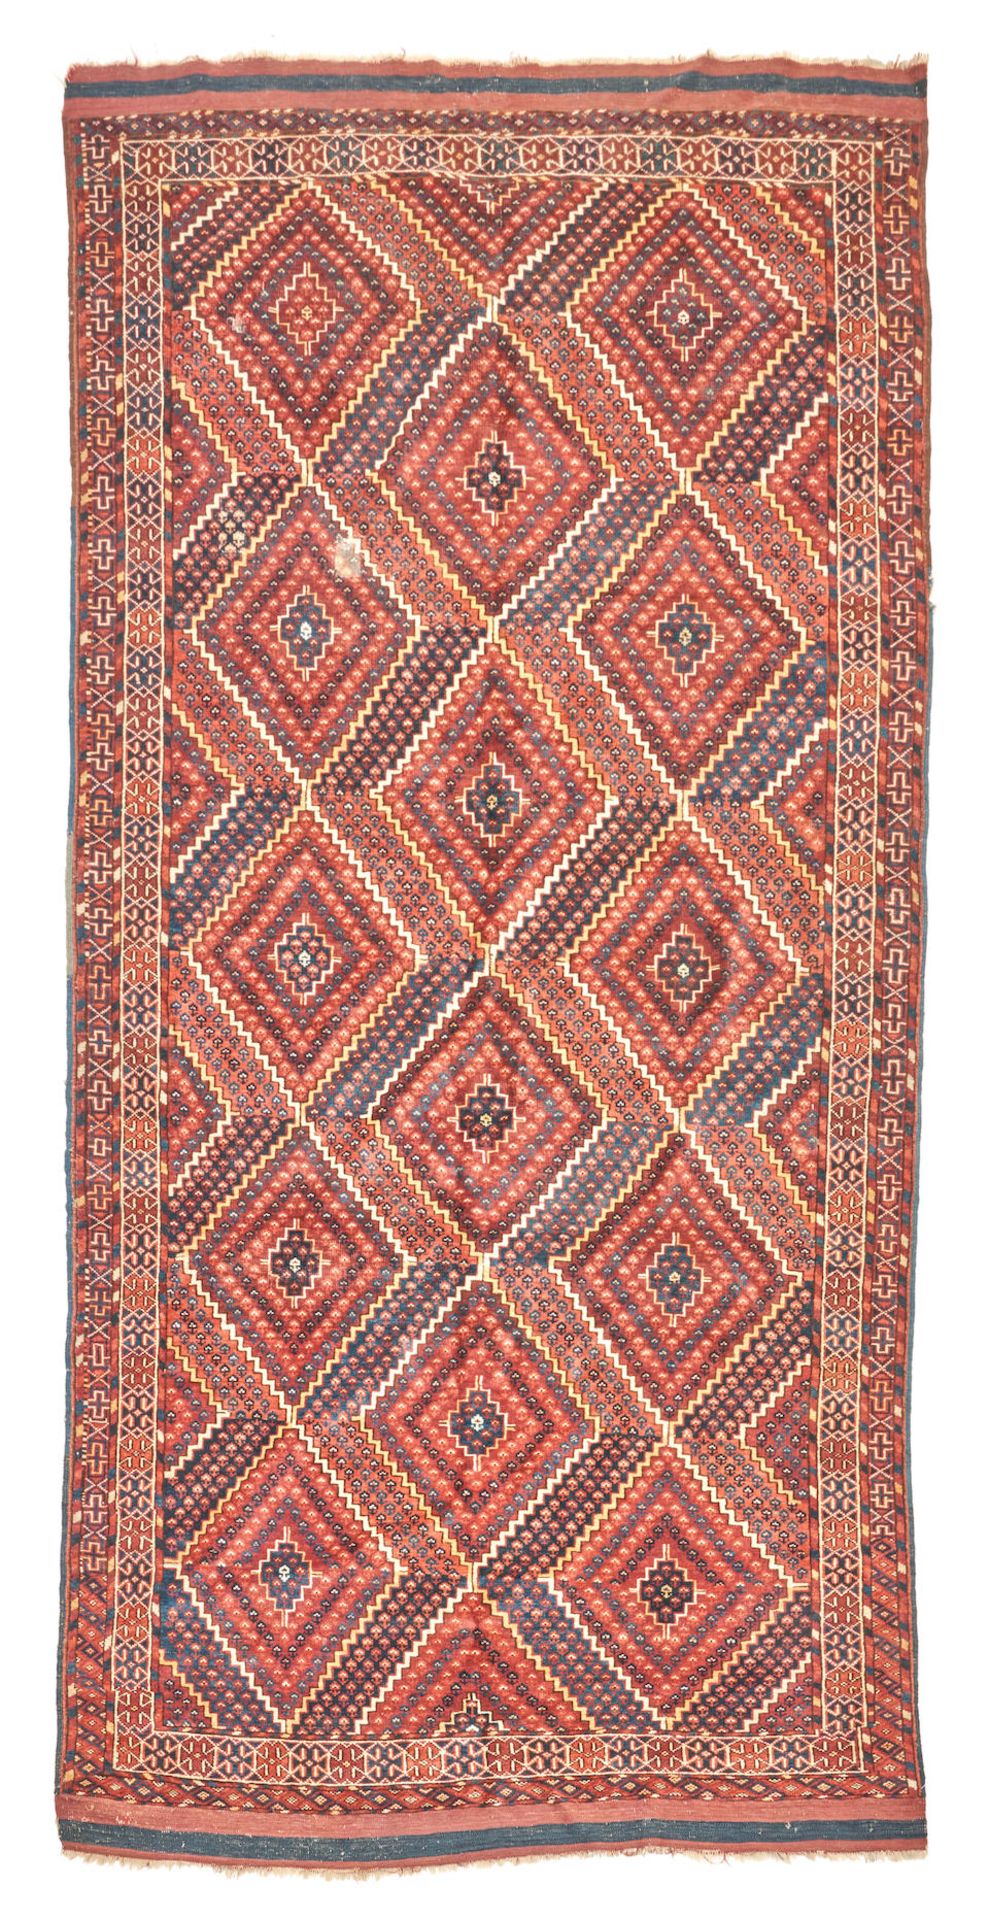 Unusual Central Asian Carpet Central Asia 4 ft. 5 in. x 9 ft. 3 in.